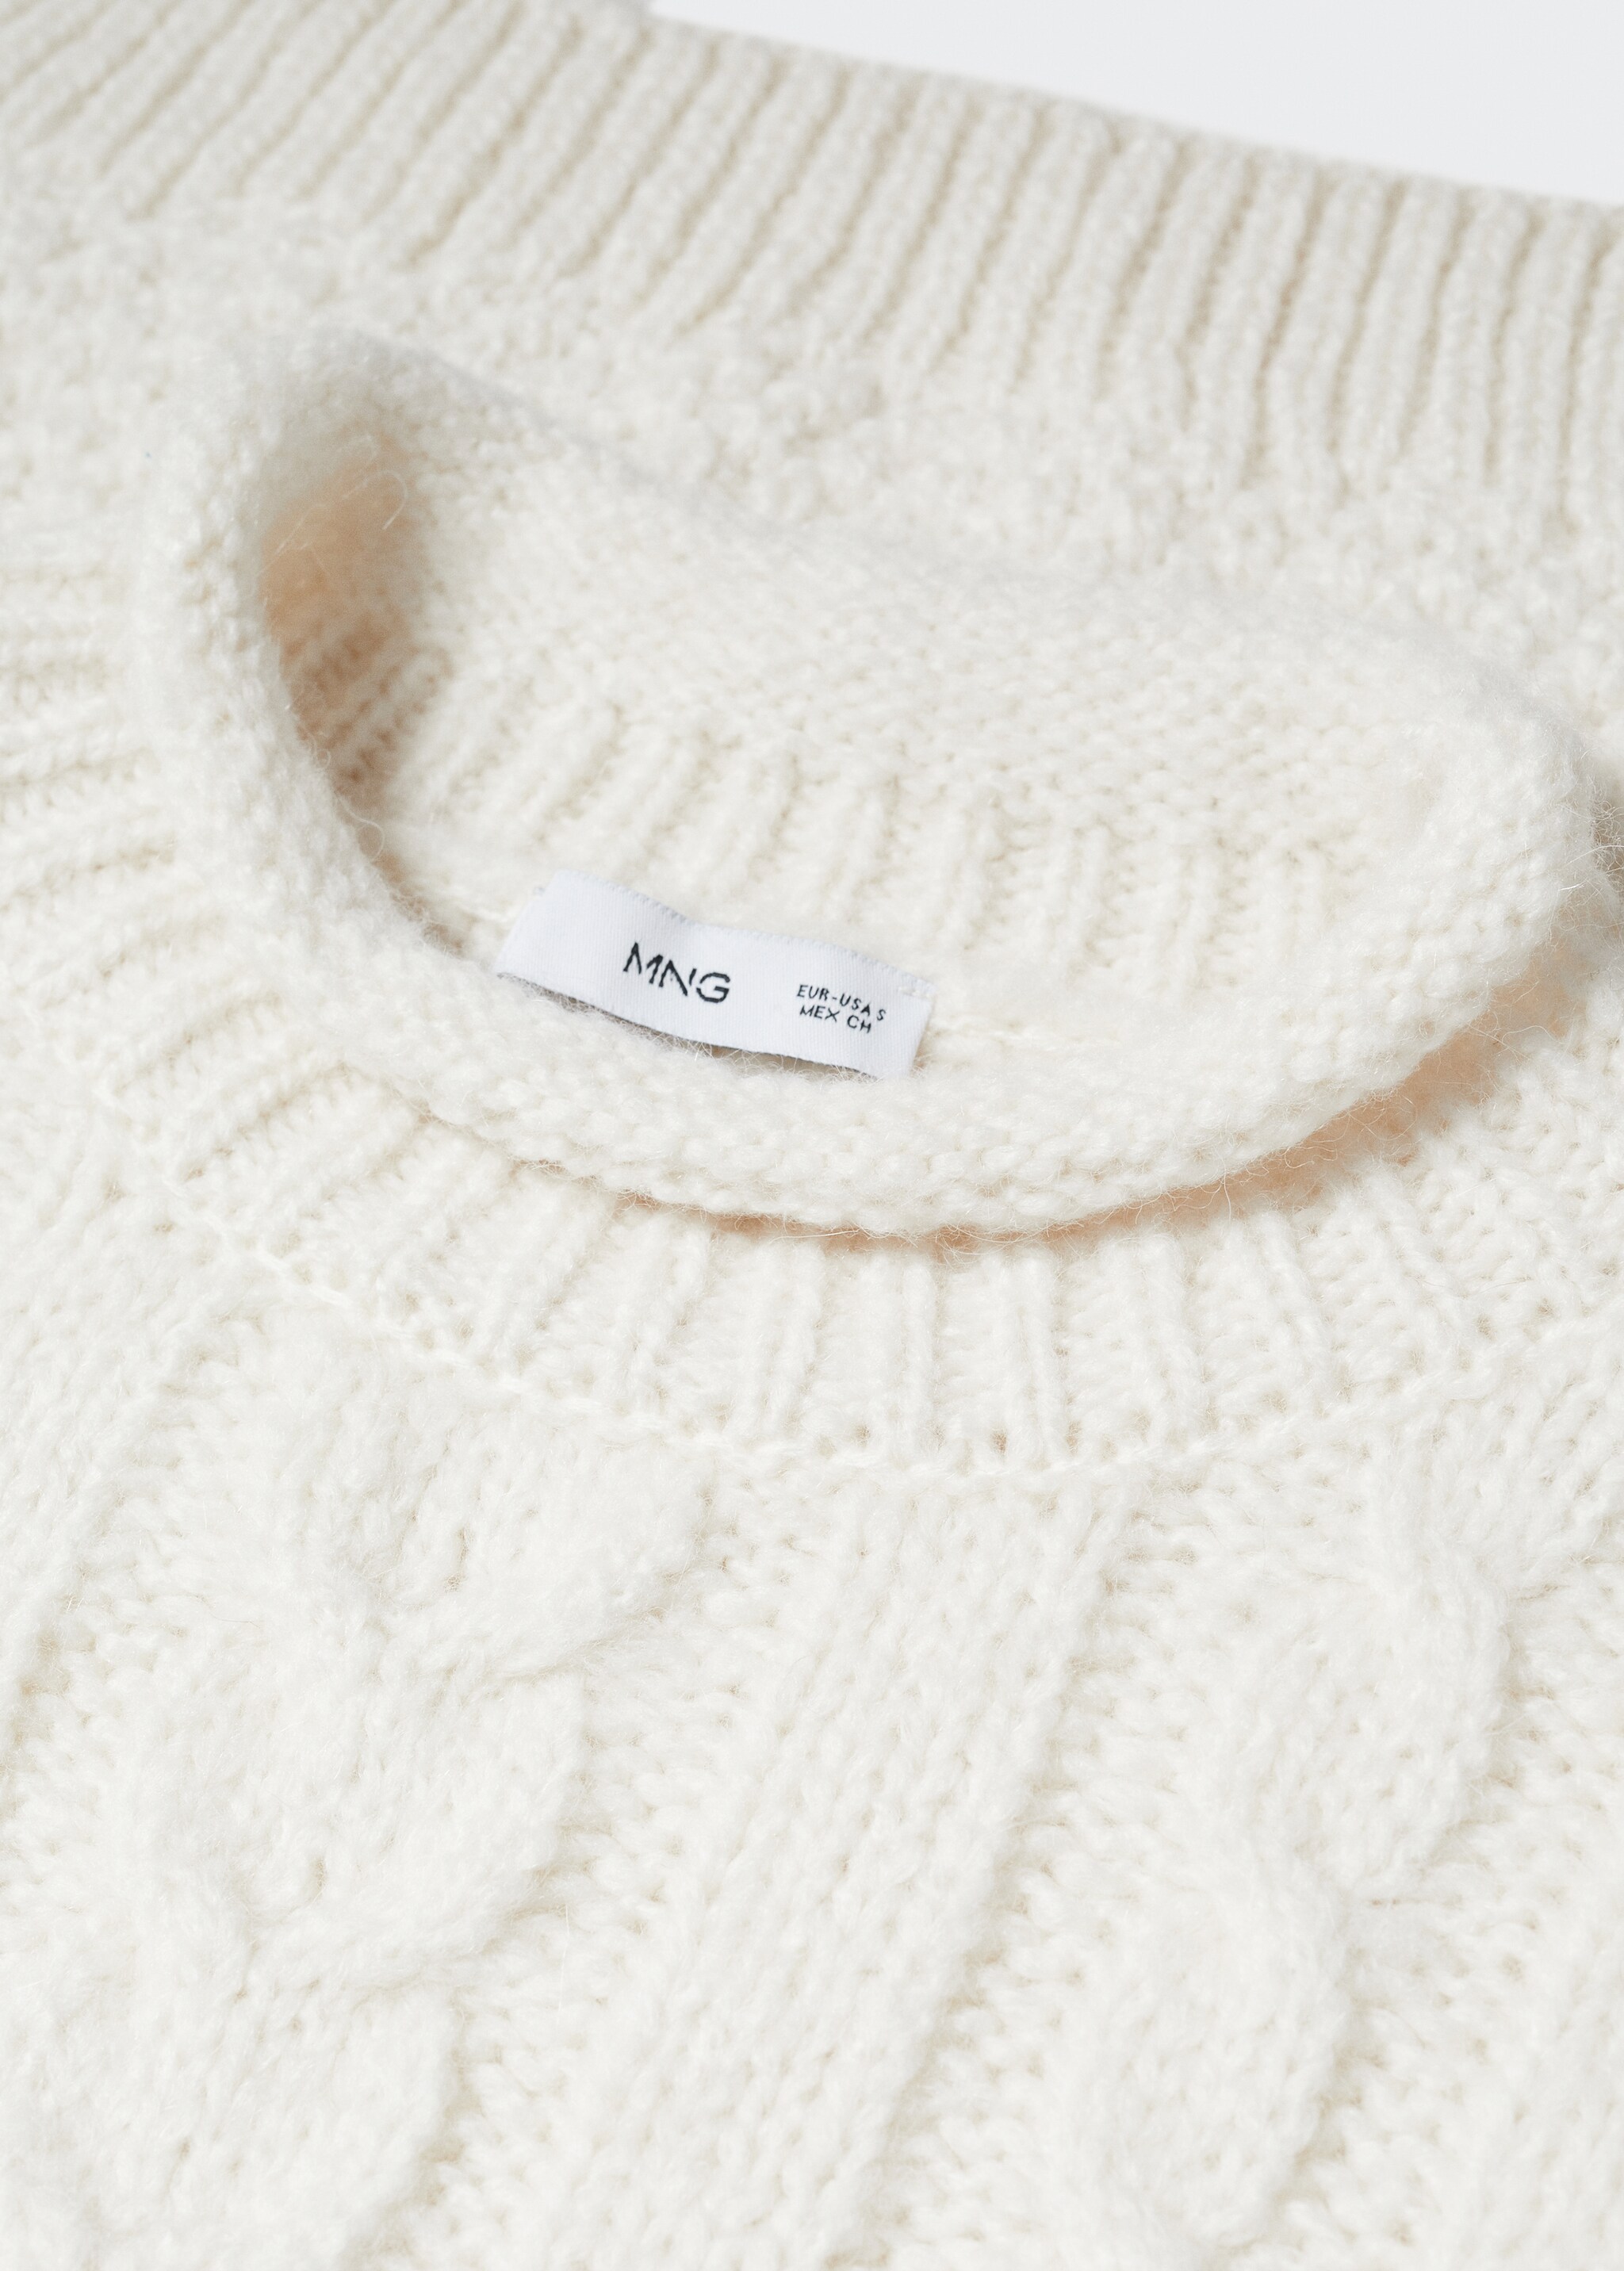 Braided wool sweater - Details of the article 8